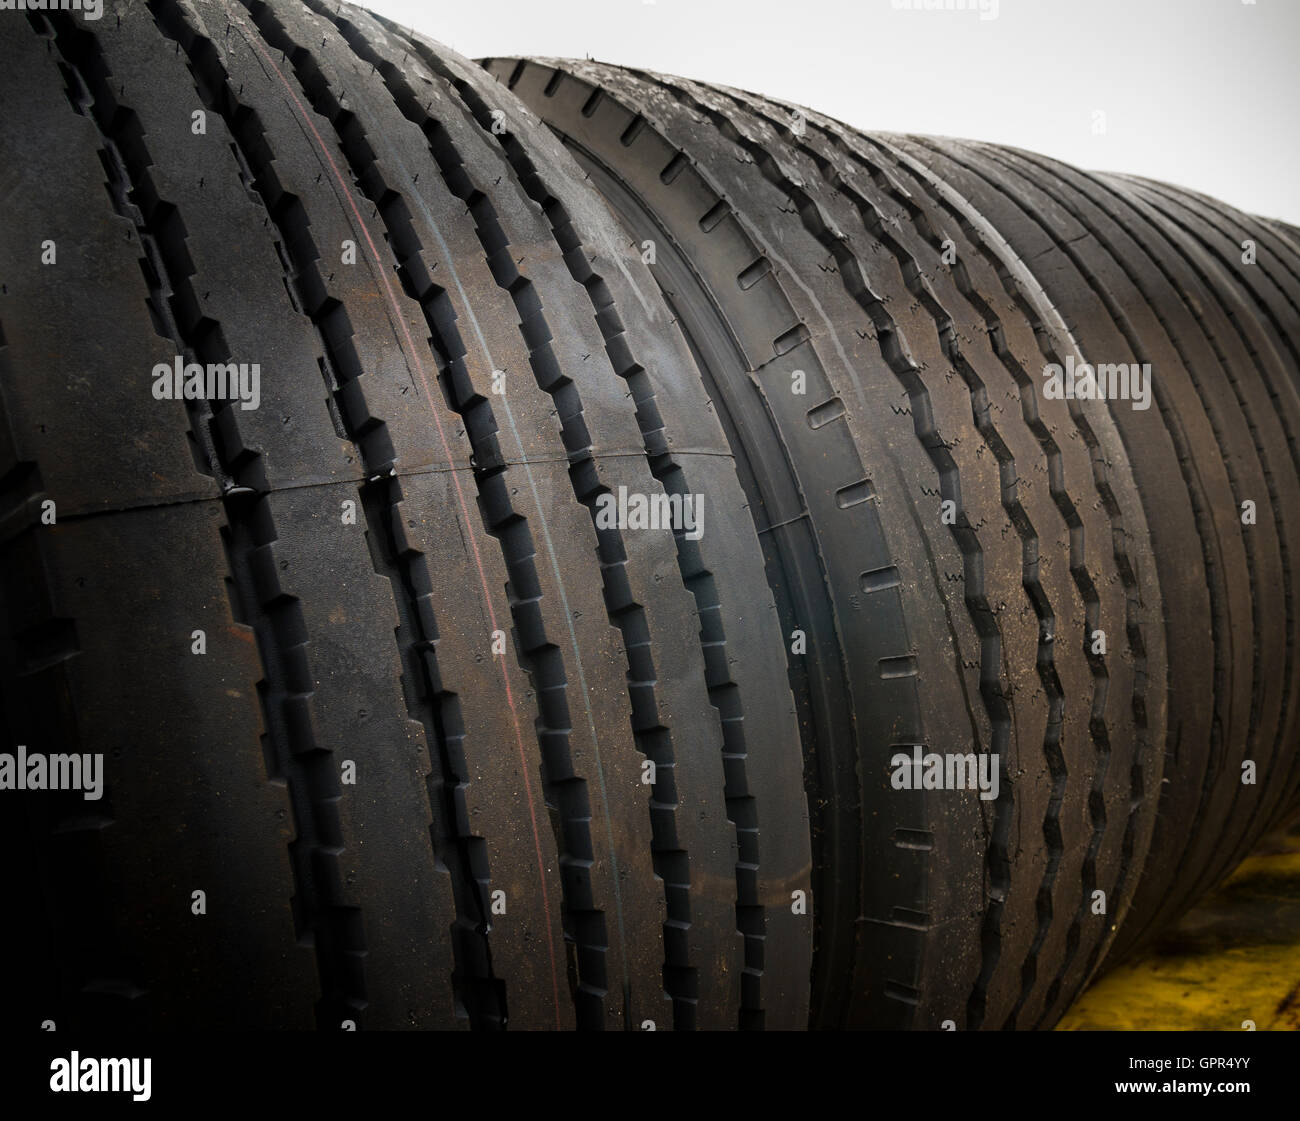 closeup of brand new truck tires Stock Photo